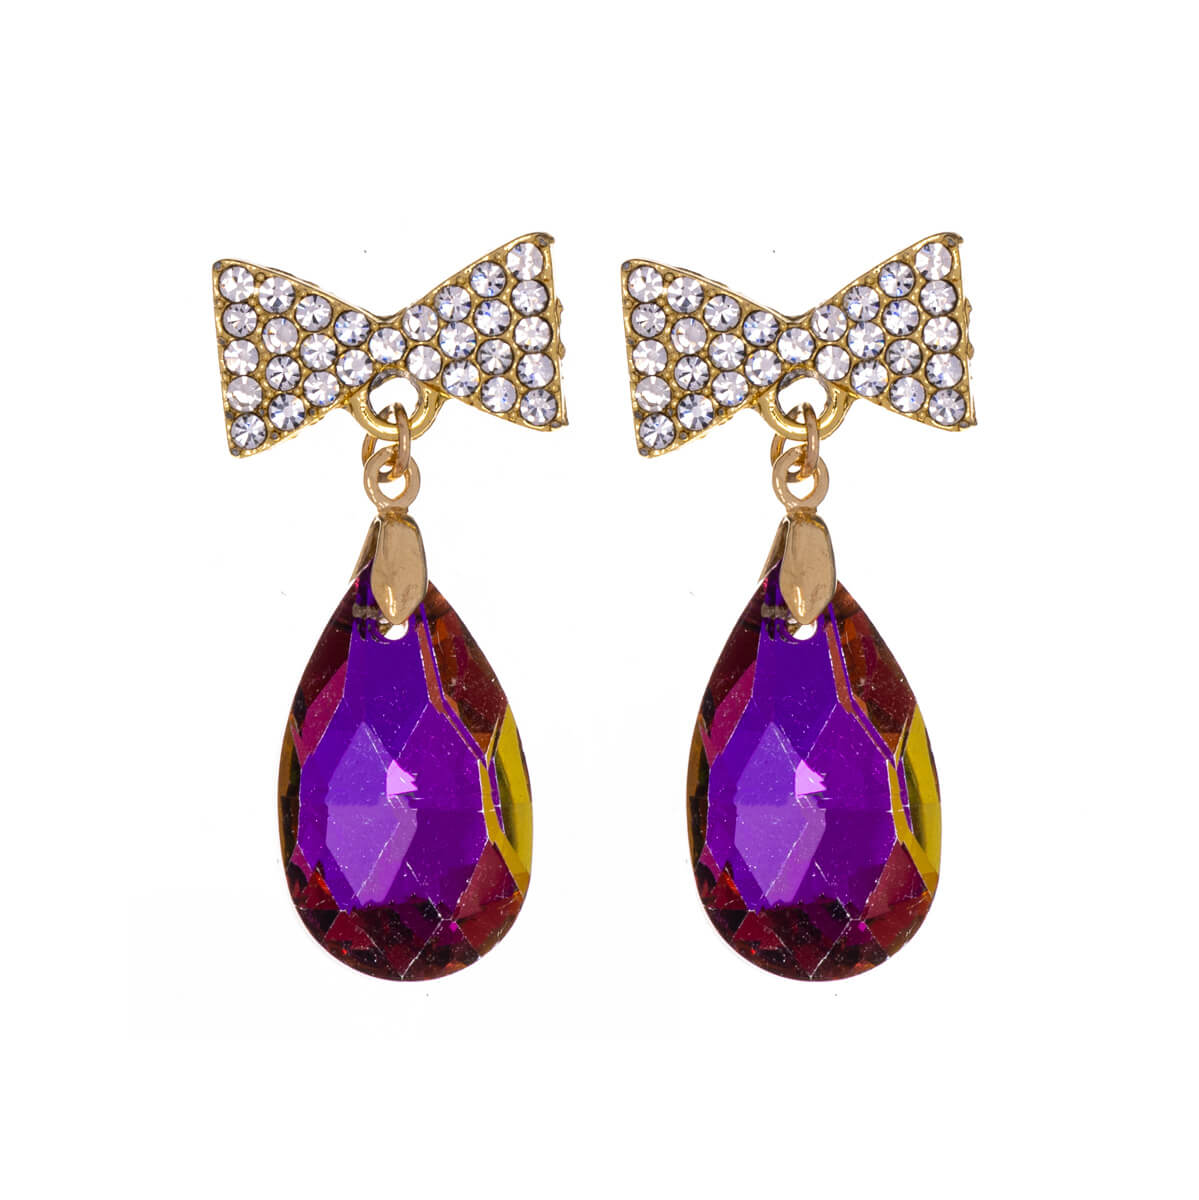 Sparkling bow earrings with dangling teardrops